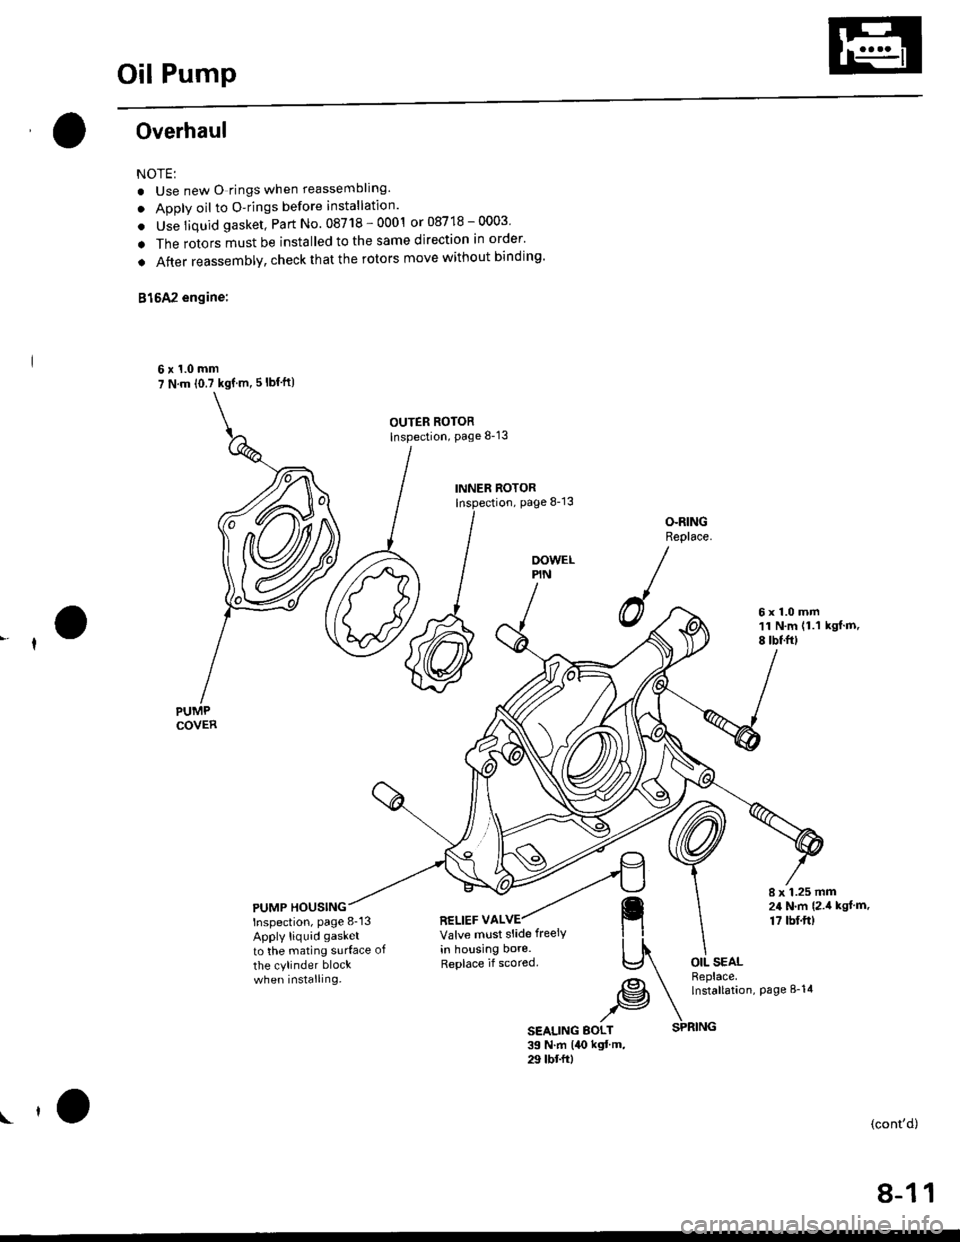 HONDA CIVIC 1997 6.G Workshop Manual Oil Pump
Overhaul
NOTE:
. Use new O rings when reassembllng.
. Apply oil to O-rings before installation.
. Use liquid gasket, Part No. 08718 - 0001 or 08718 - 0003
. The rotors must be installed to th